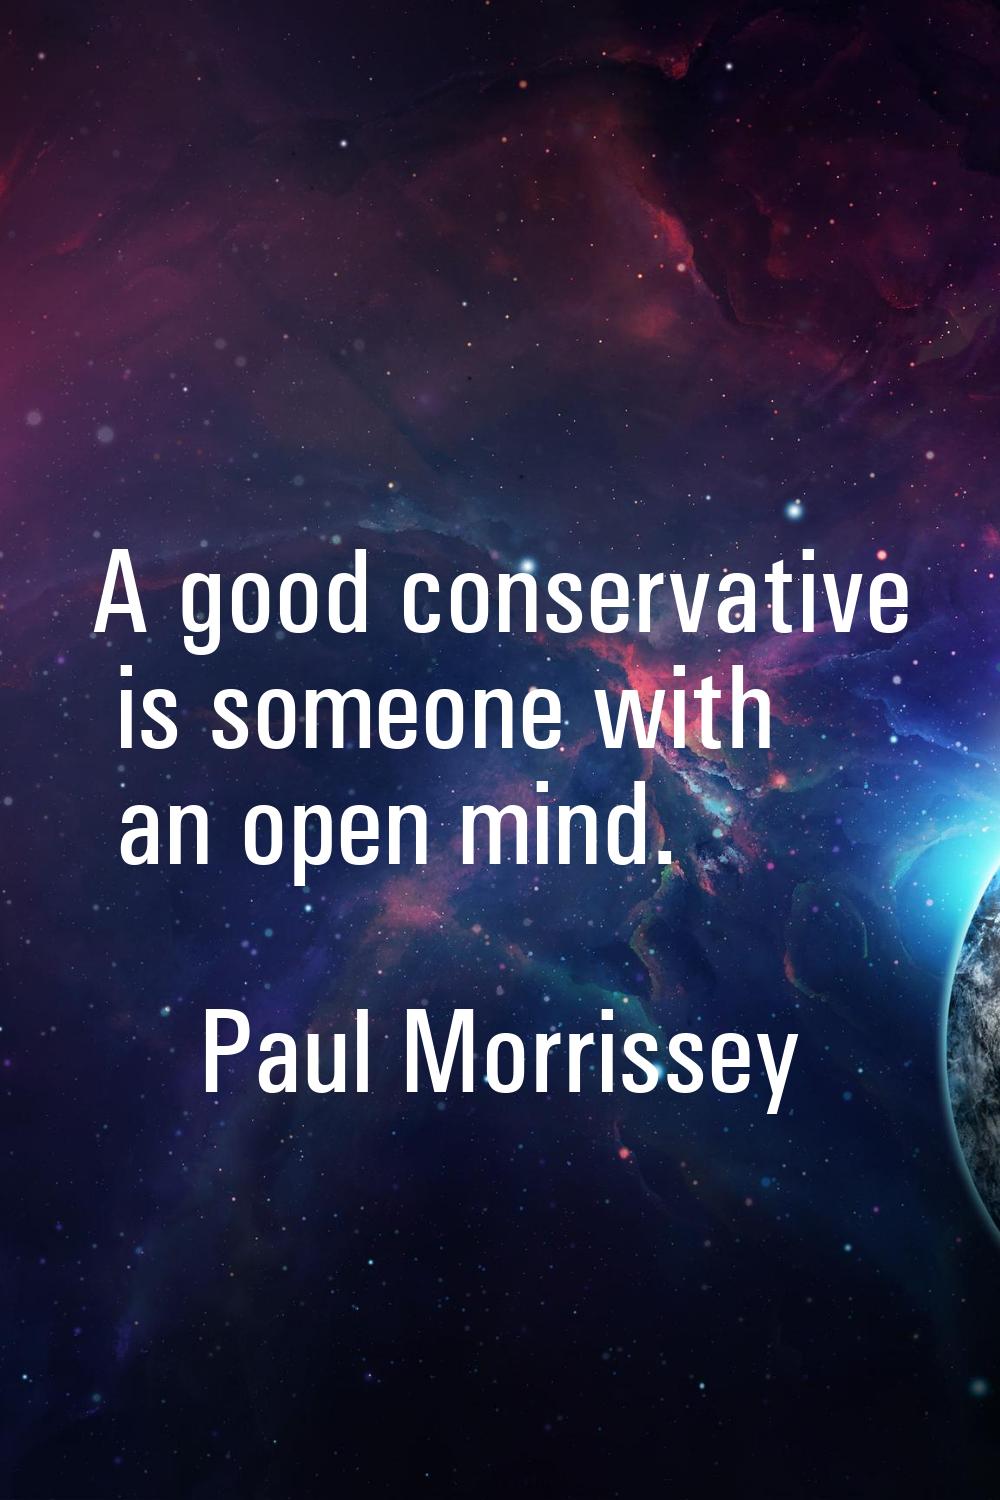 A good conservative is someone with an open mind.